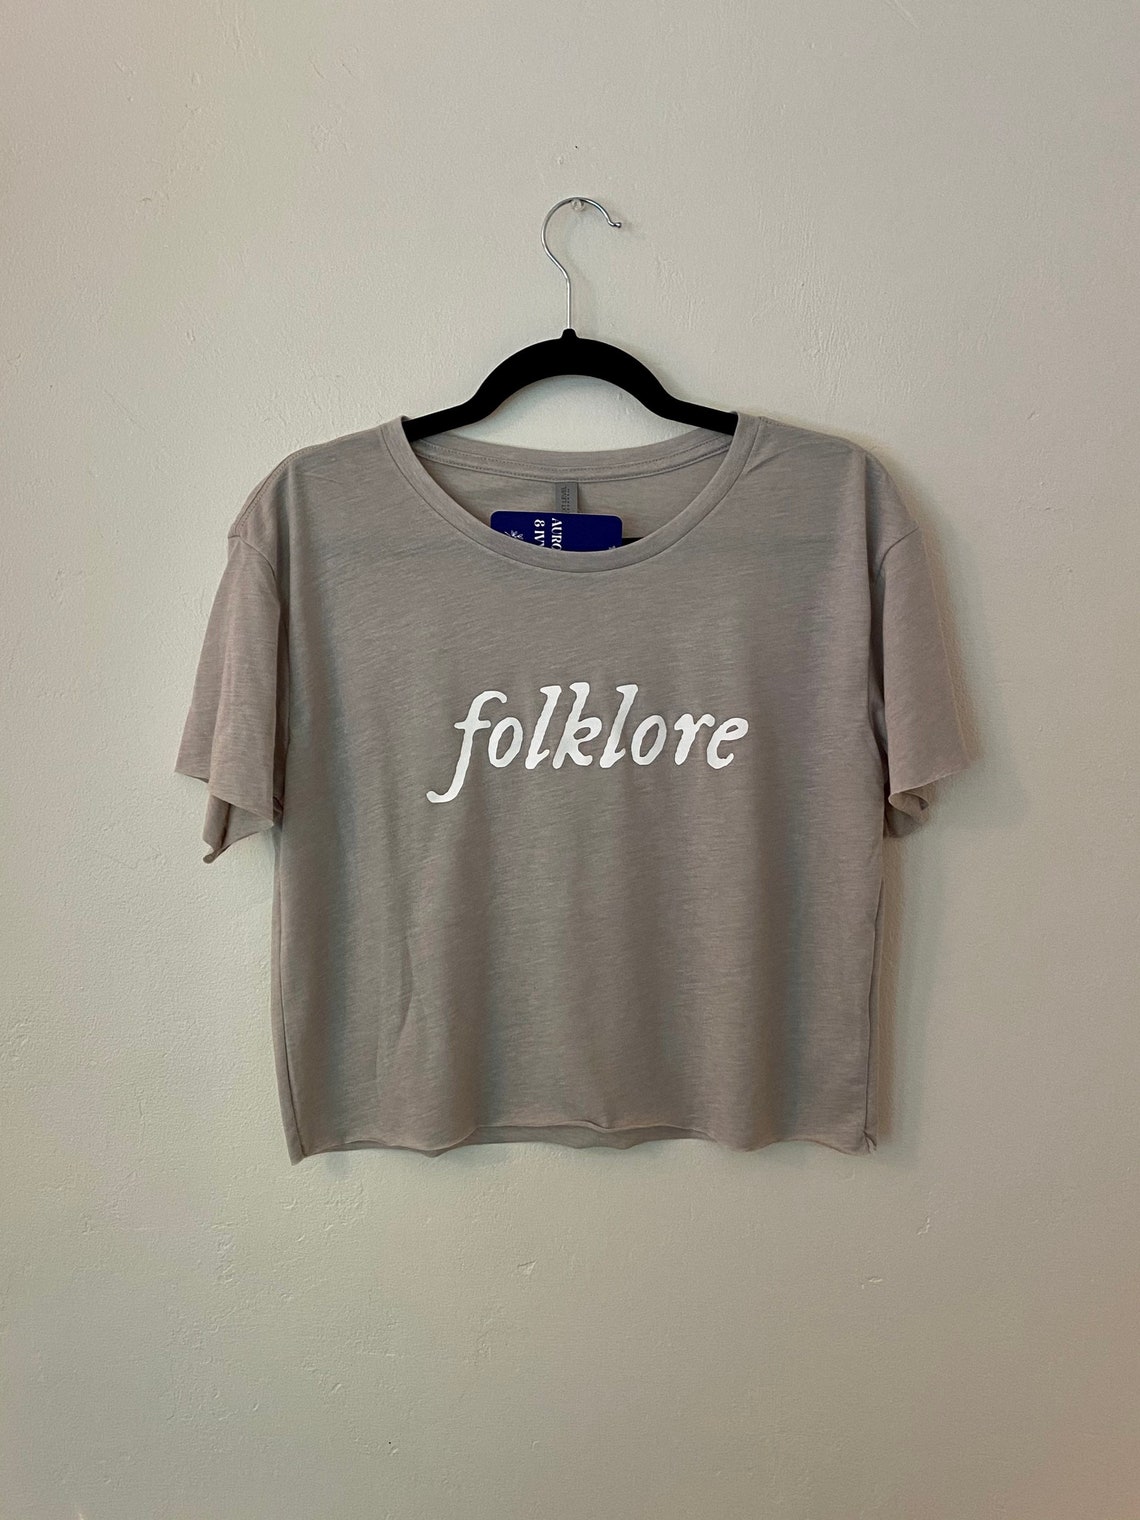 Folklore Crop Top Taylor Swift Folklore T-shirt Folklore - Etsy